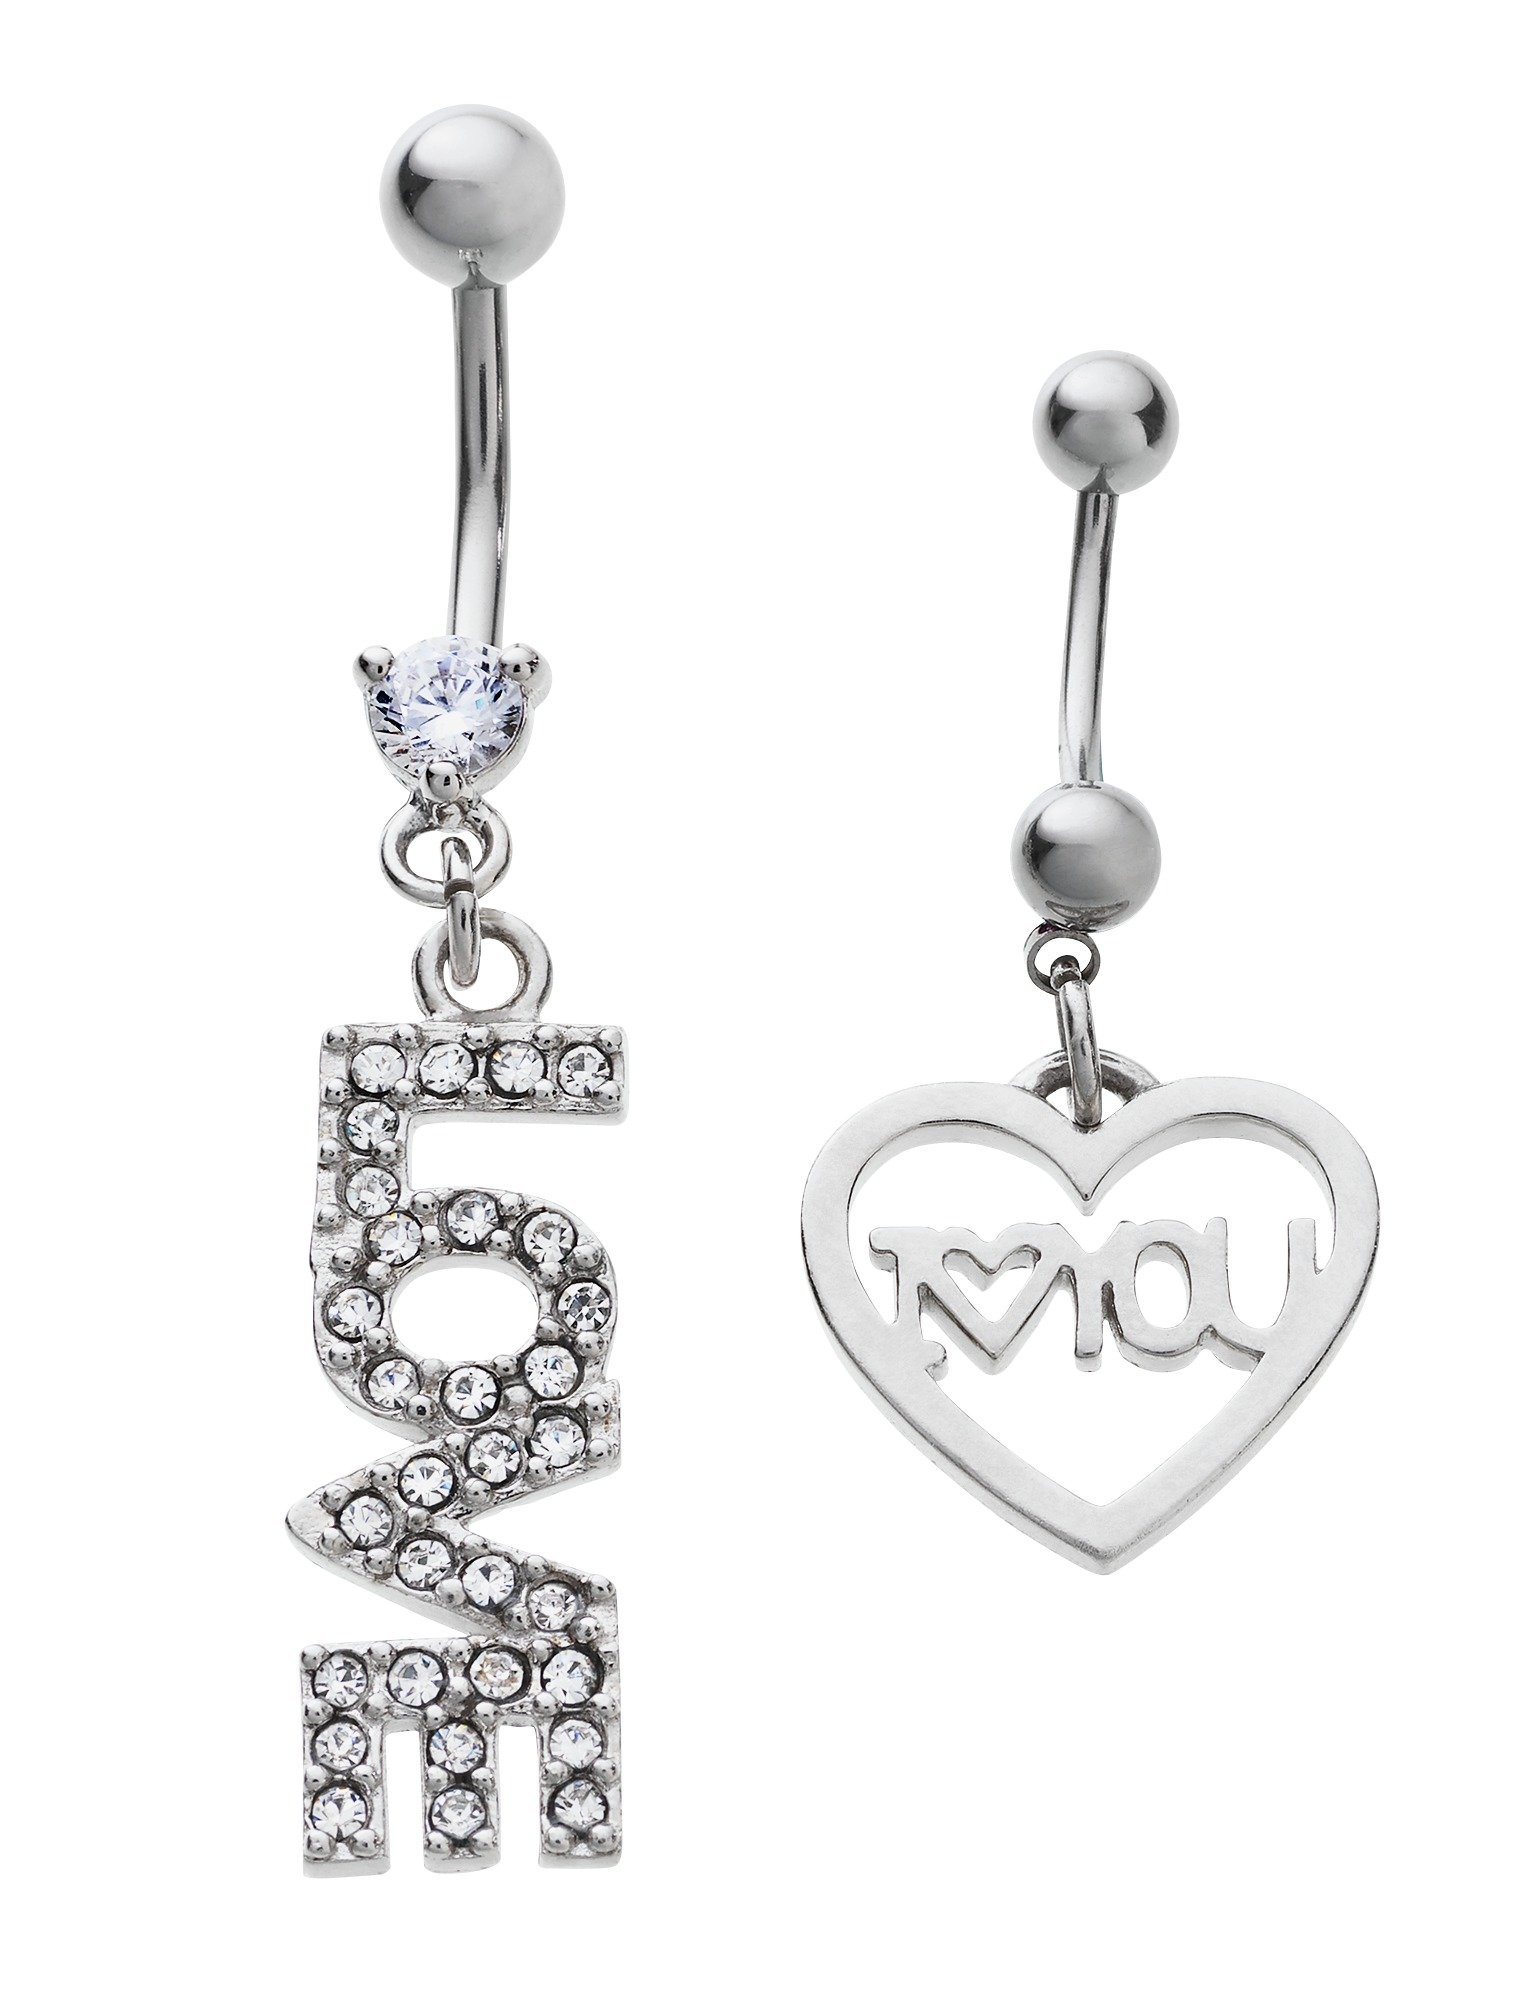 State of Mine Stainless Steel Love Belly Bars - Set of 2